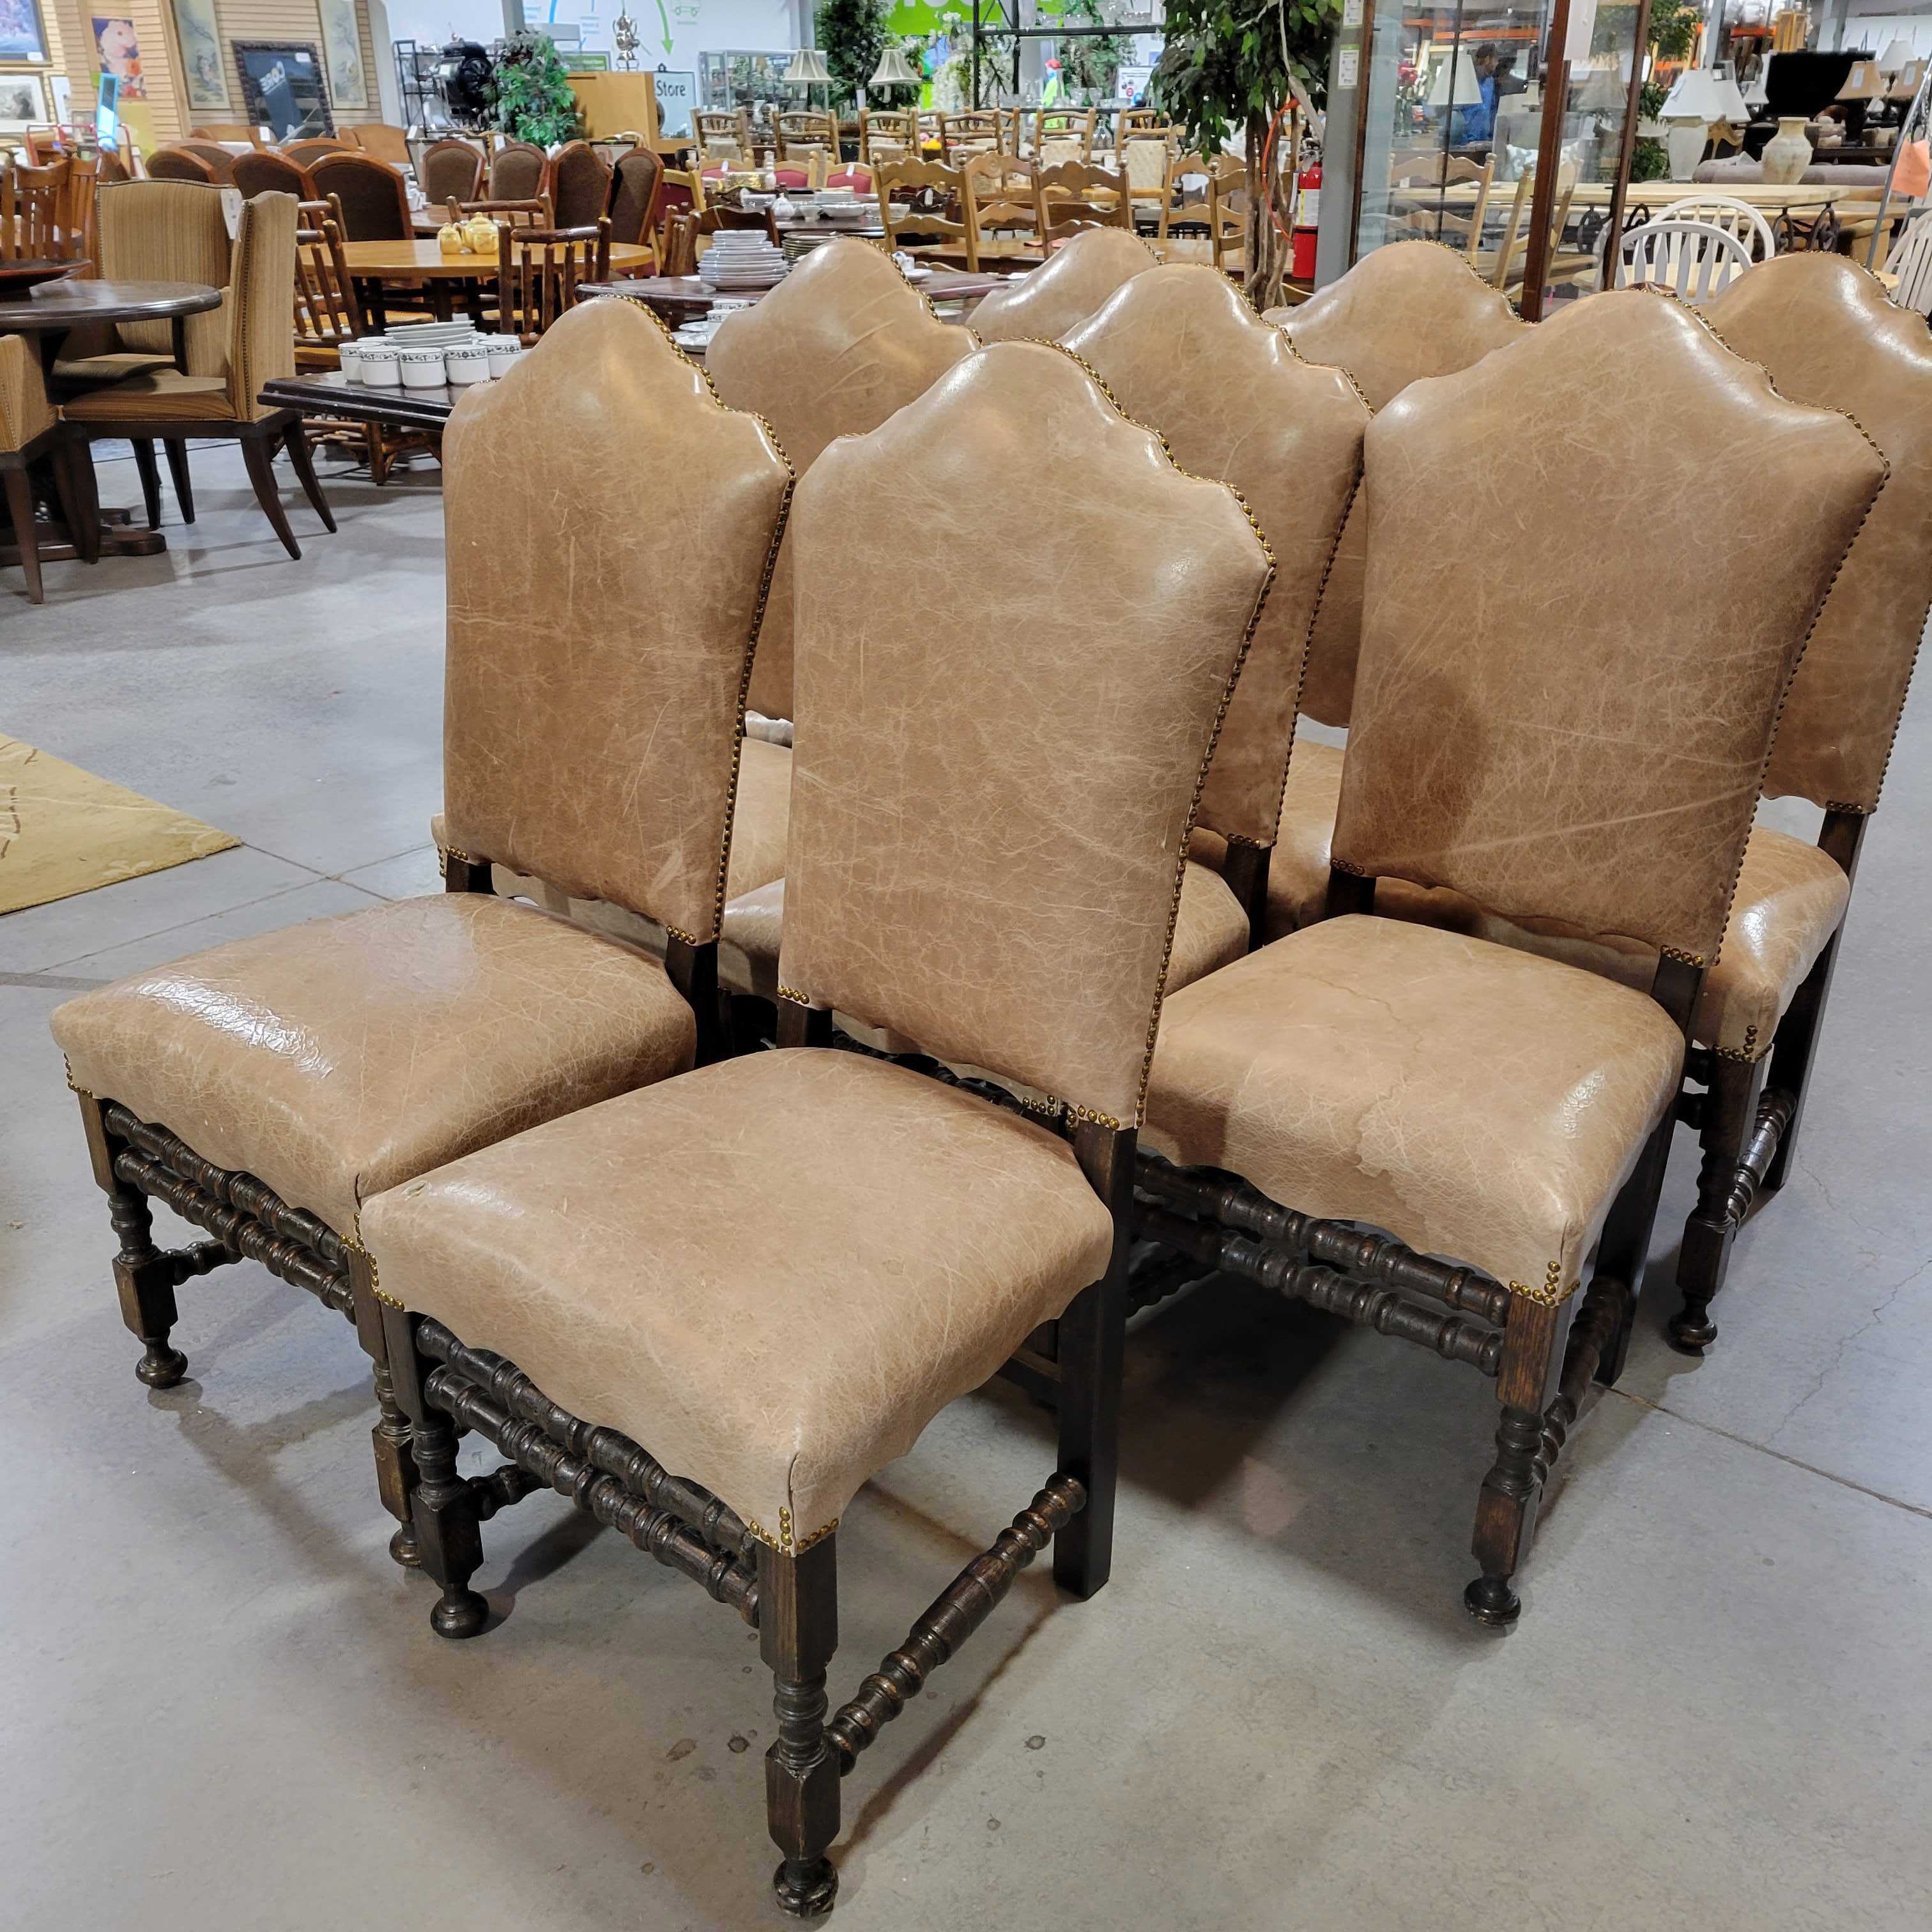 SET of 8 Carved Wood Beige Distressed Leather Nailhead Dining Chairs